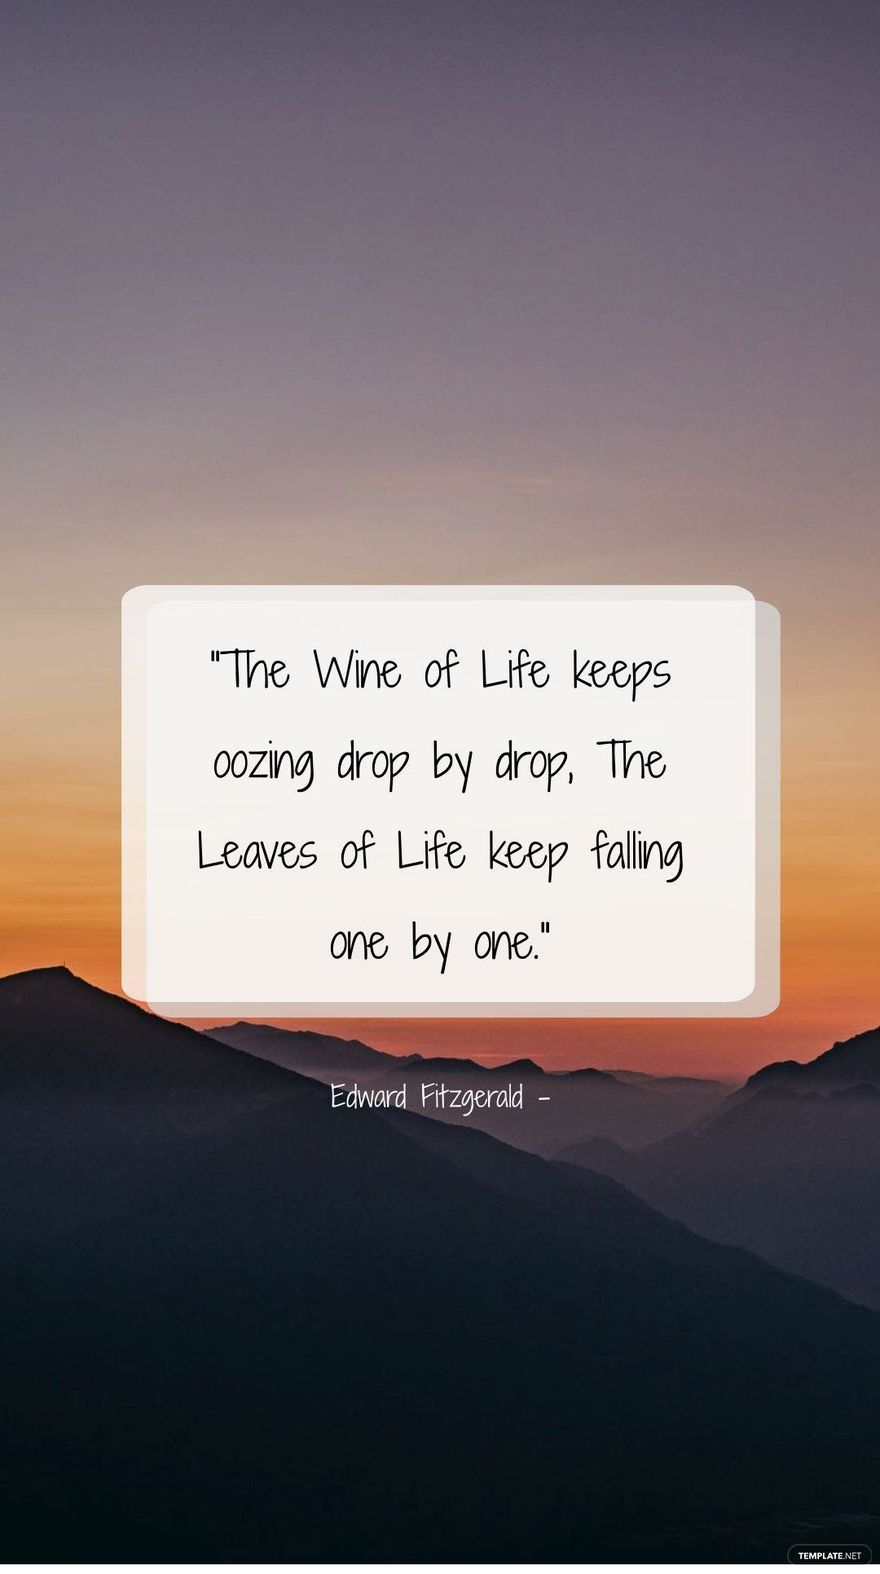 Edward Fitzgerald - The Wine of Life keeps oozing drop by drop, The Leaves of Life keep falling one by one.